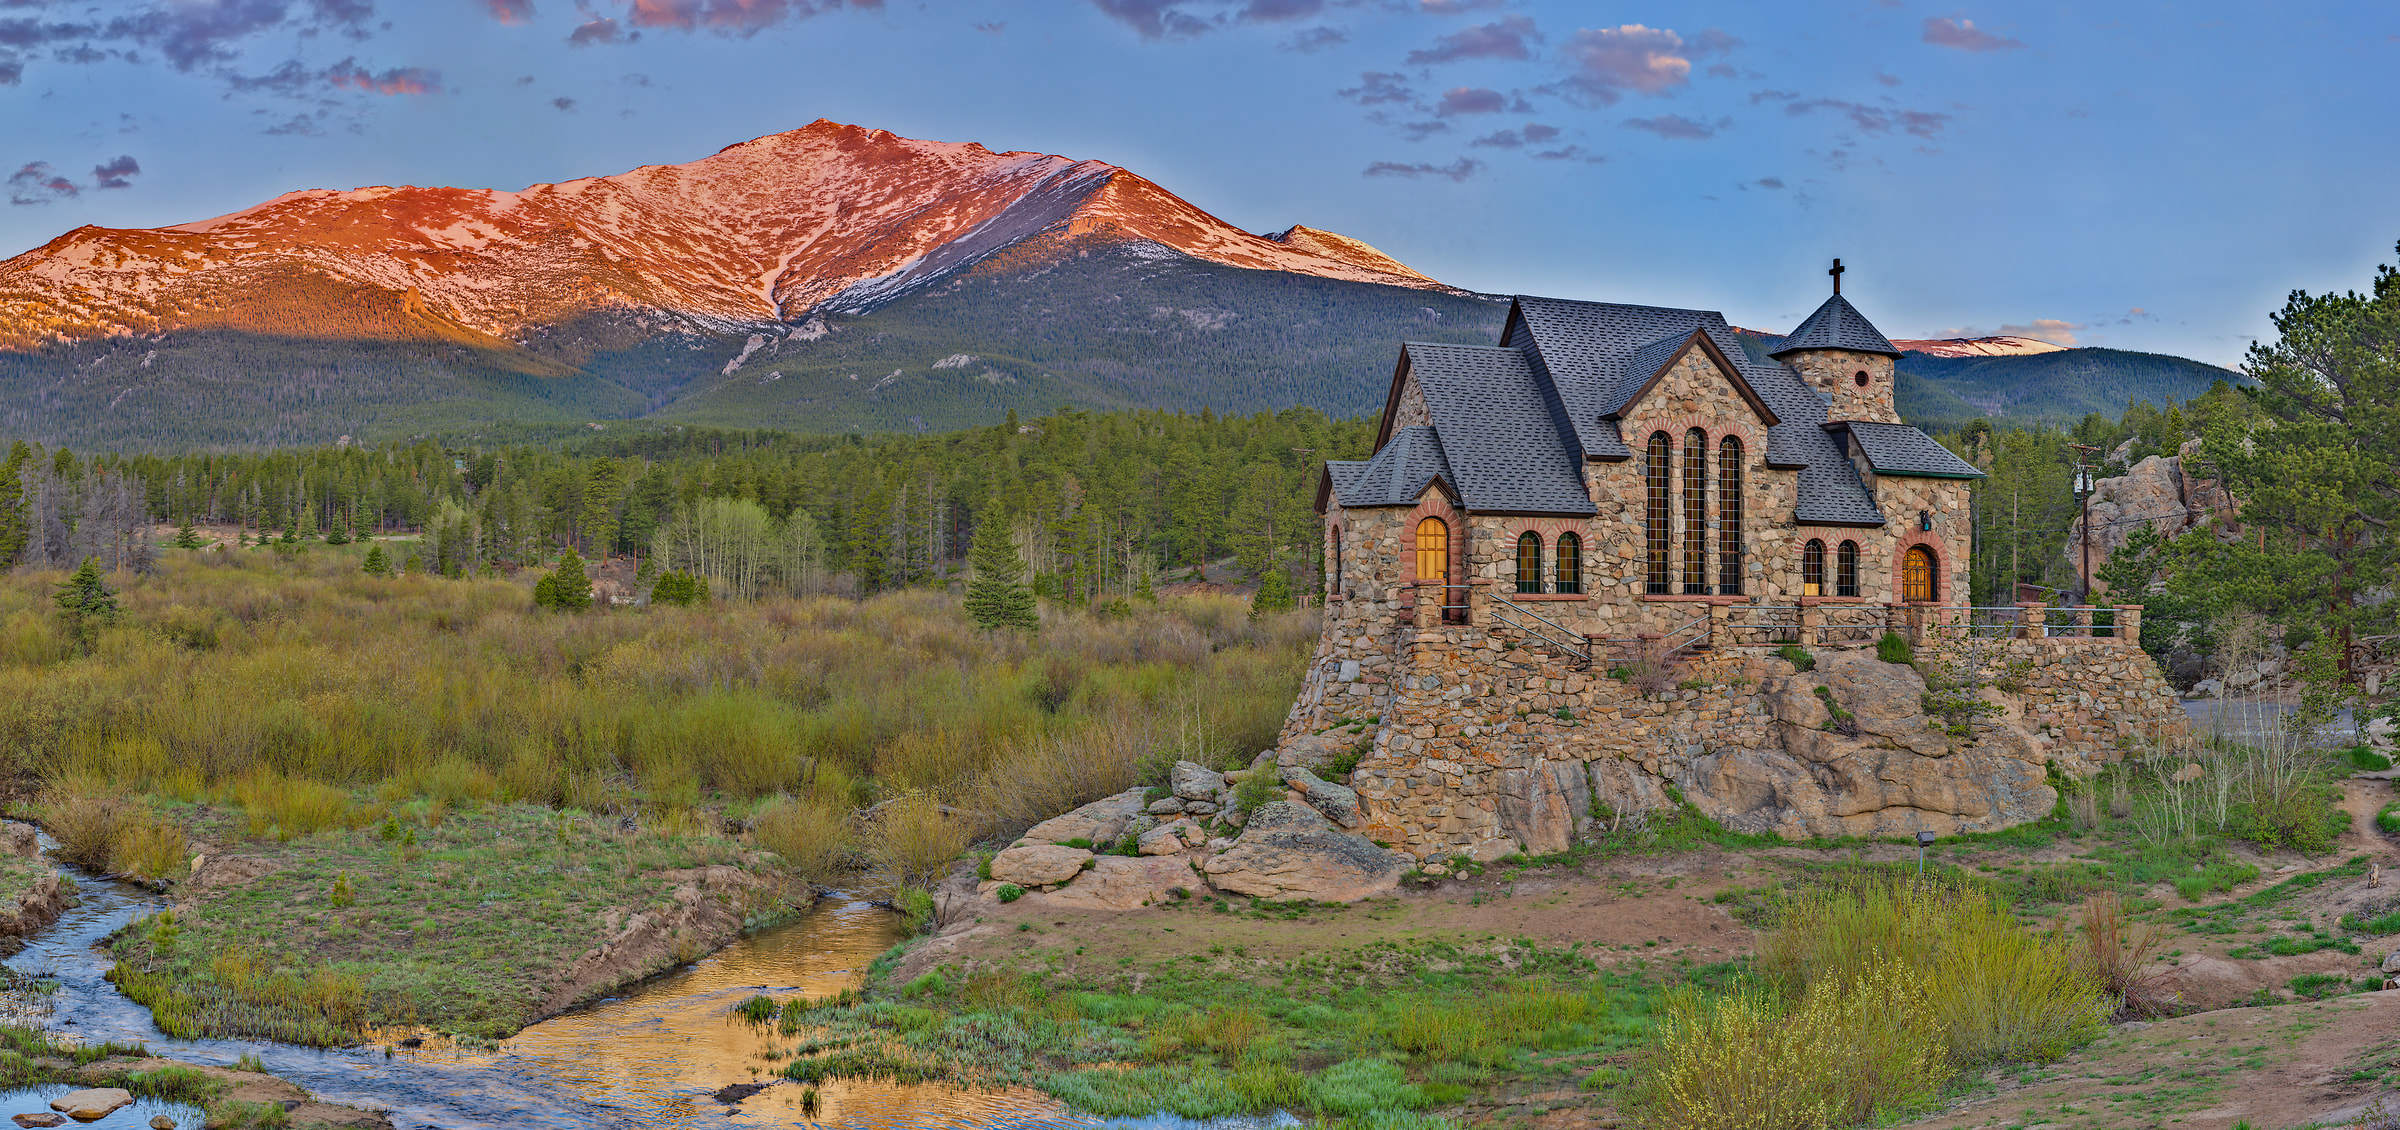 3,530 megapixels! A very high resolution, large-format VAST photo print of Saint Catherine's Chapel on the Rock; photograph created by John Freeman in Allenspark, Colorado.